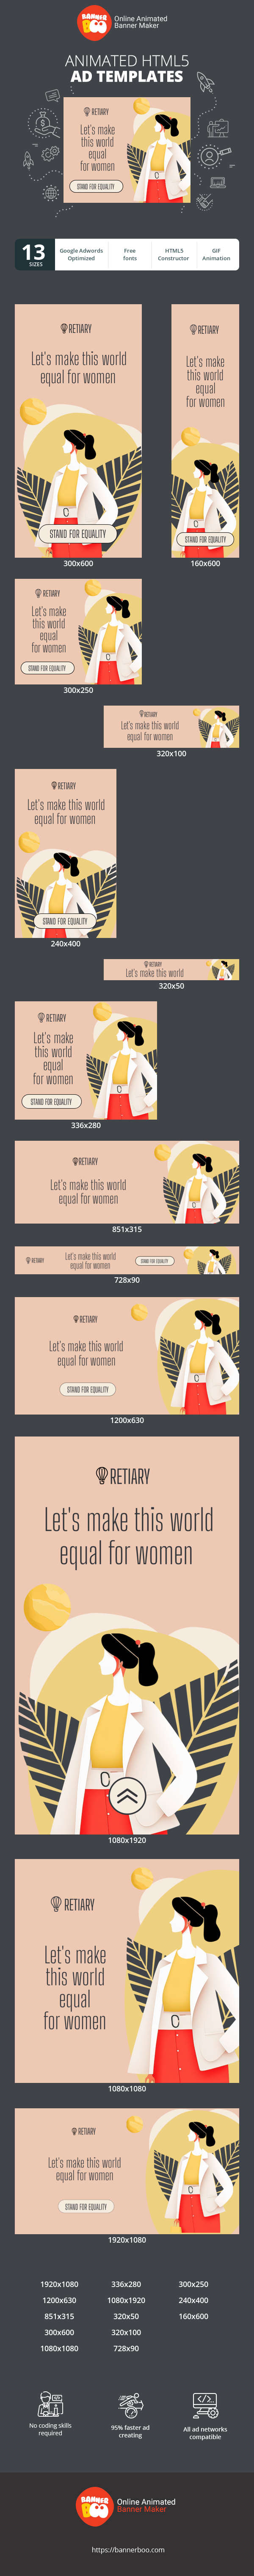 Banner ad template — Let's Make This World Equal For Women — Women's Day